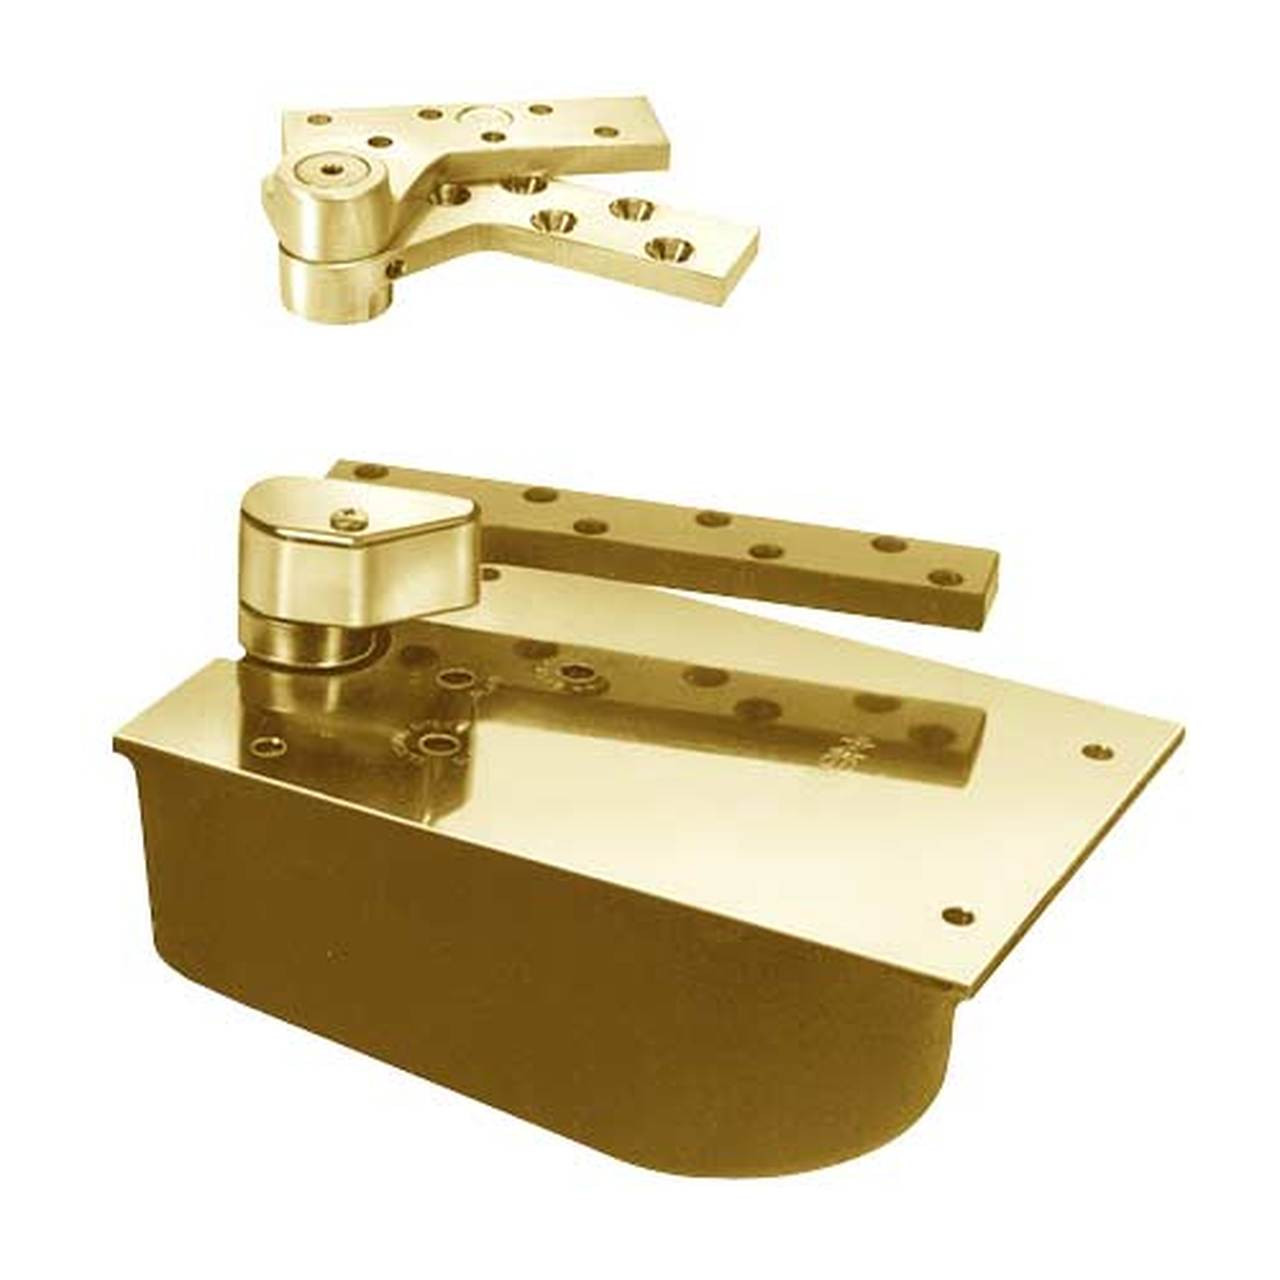 L27-85N-LFP-LCC-RH-3-605 Rixson 27 Series Extra Heavy Duty Lead Lined Offset Floor Closer in Bright Brass Finish